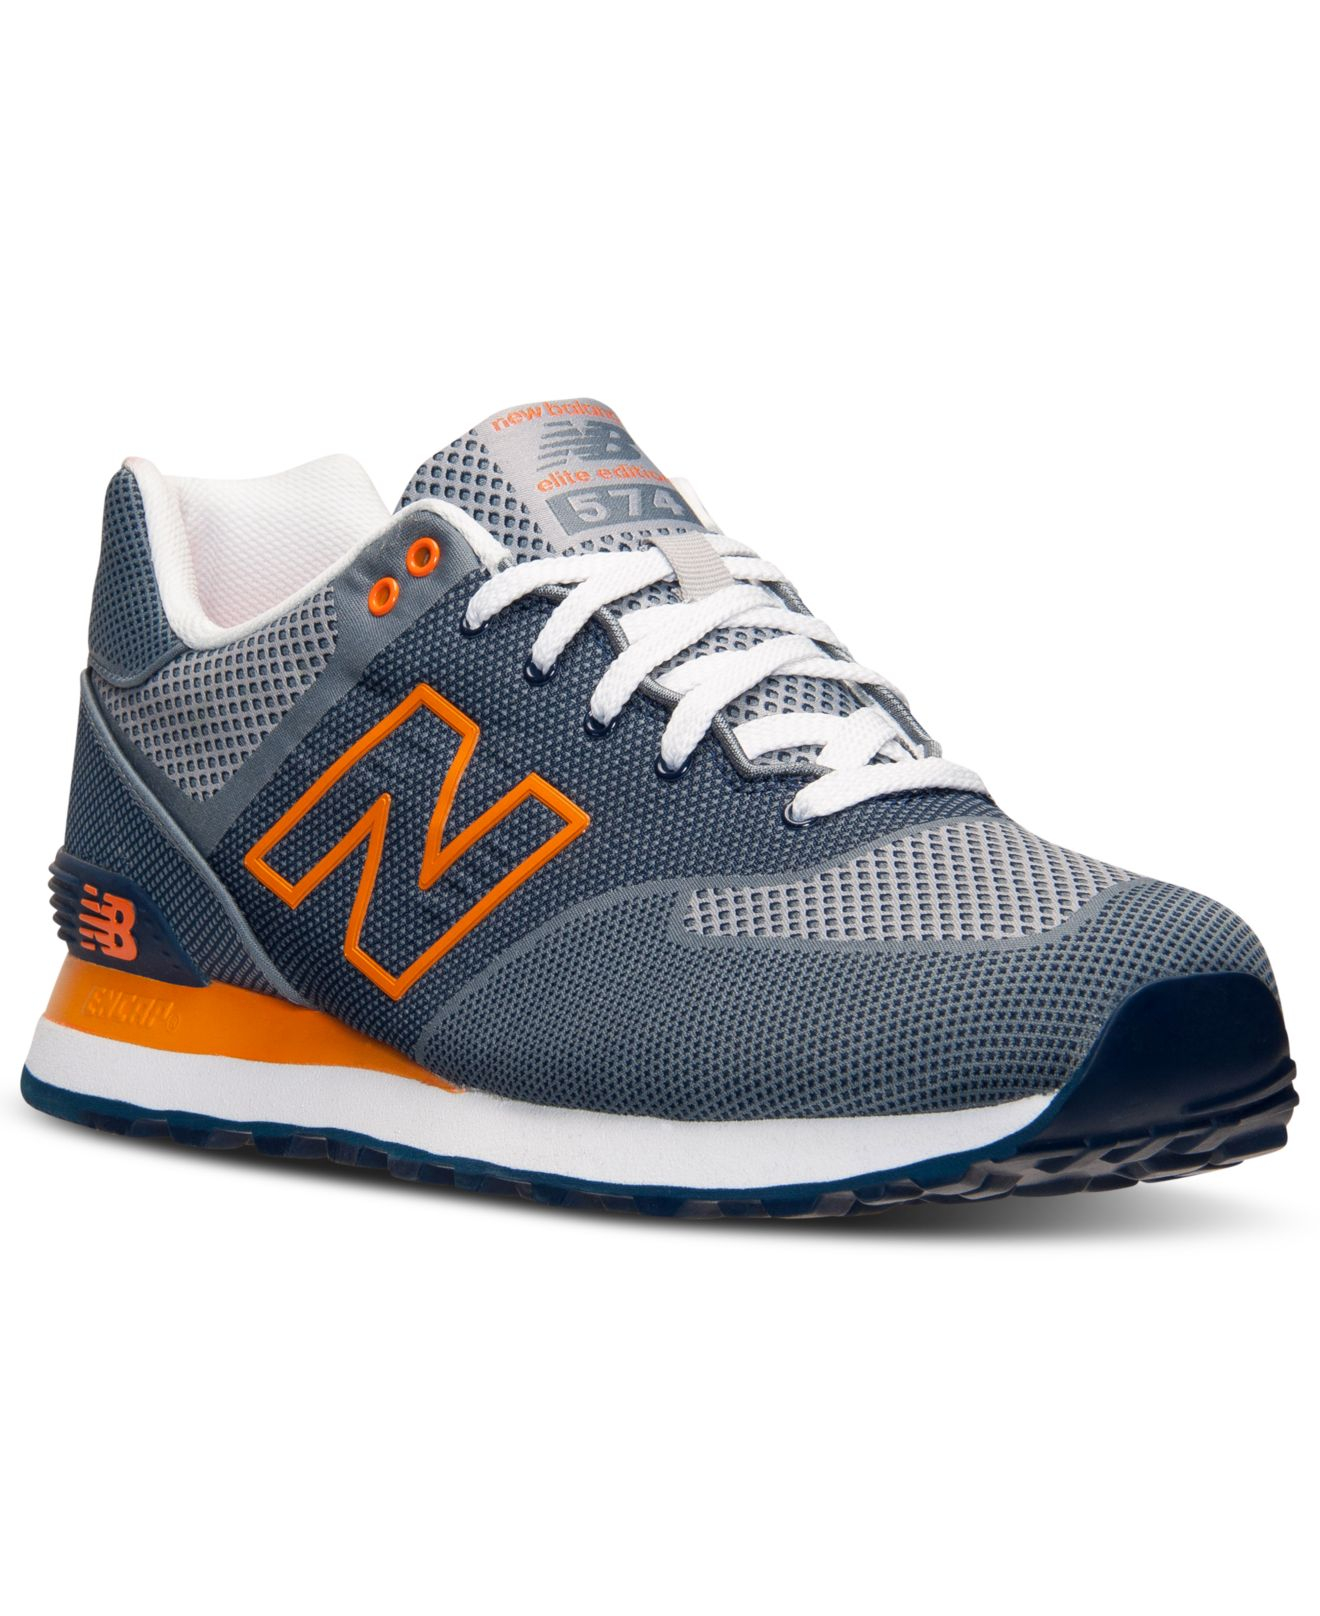 New Balance Men's 574 Woven Casual Sneakers From Finish Line in Slate